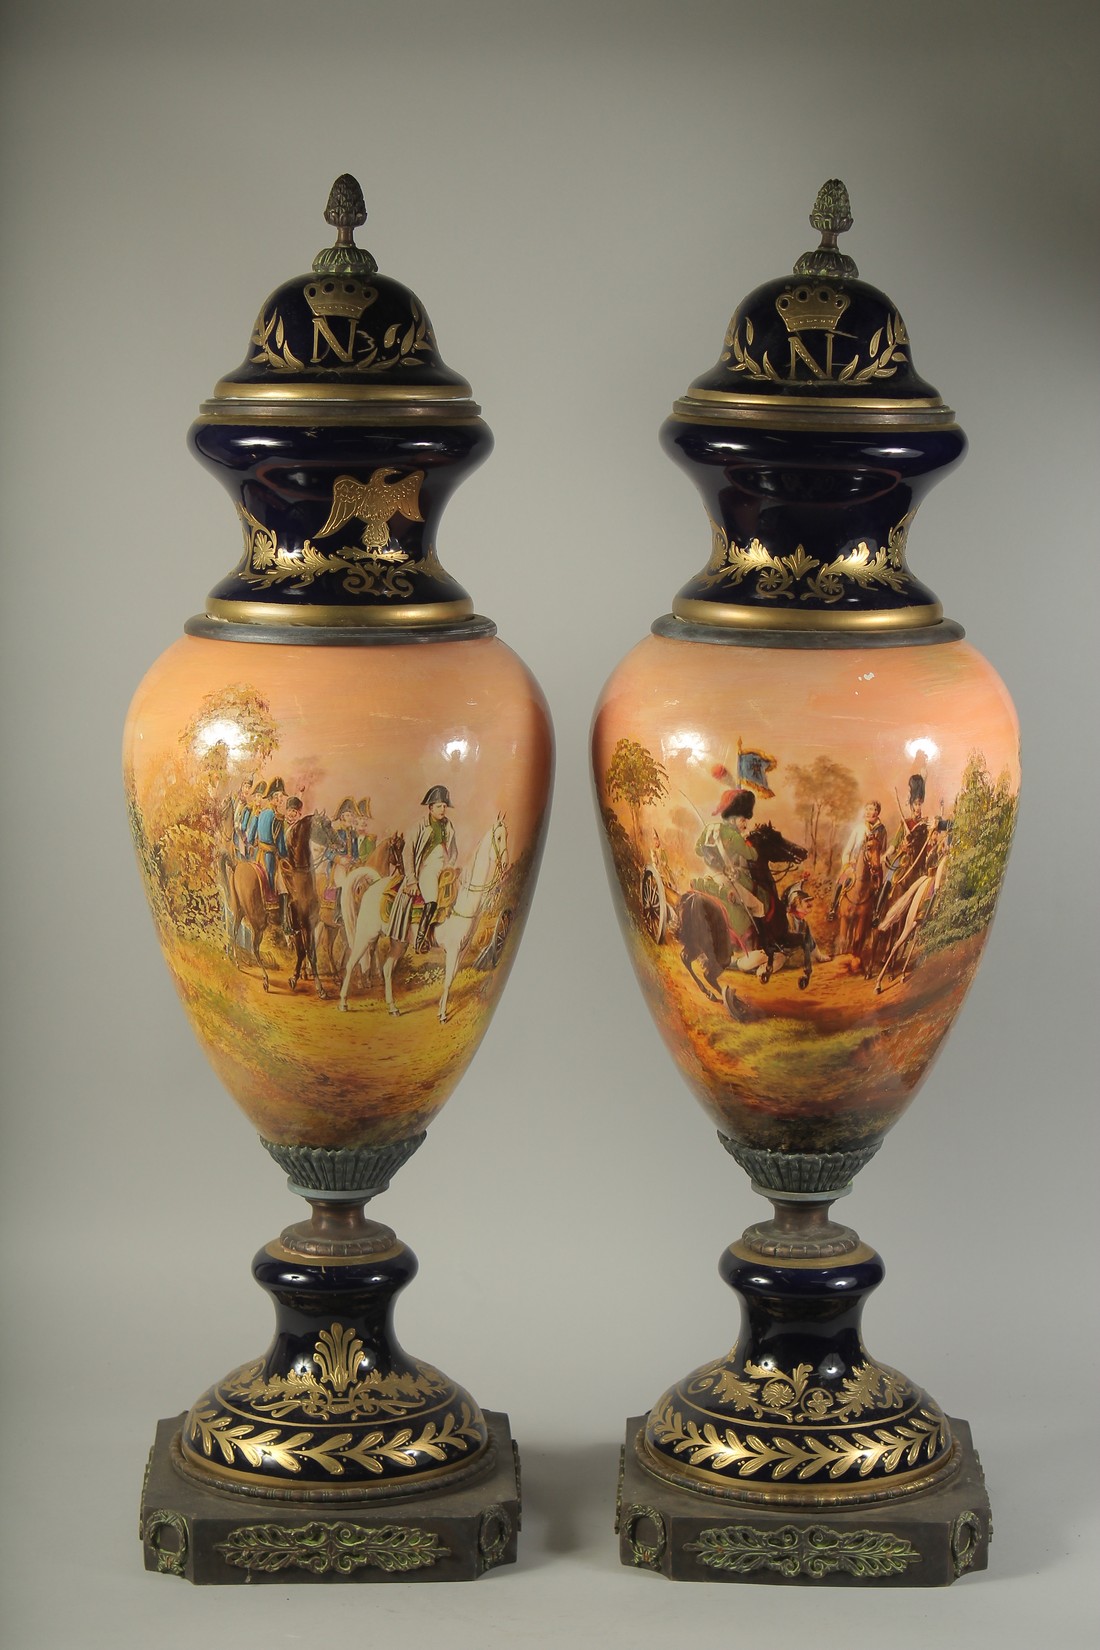 A LARGE PAIR OF PORCELAIN NAPOLEONIC VASES with an all round design of Napoleon. 34ins high.